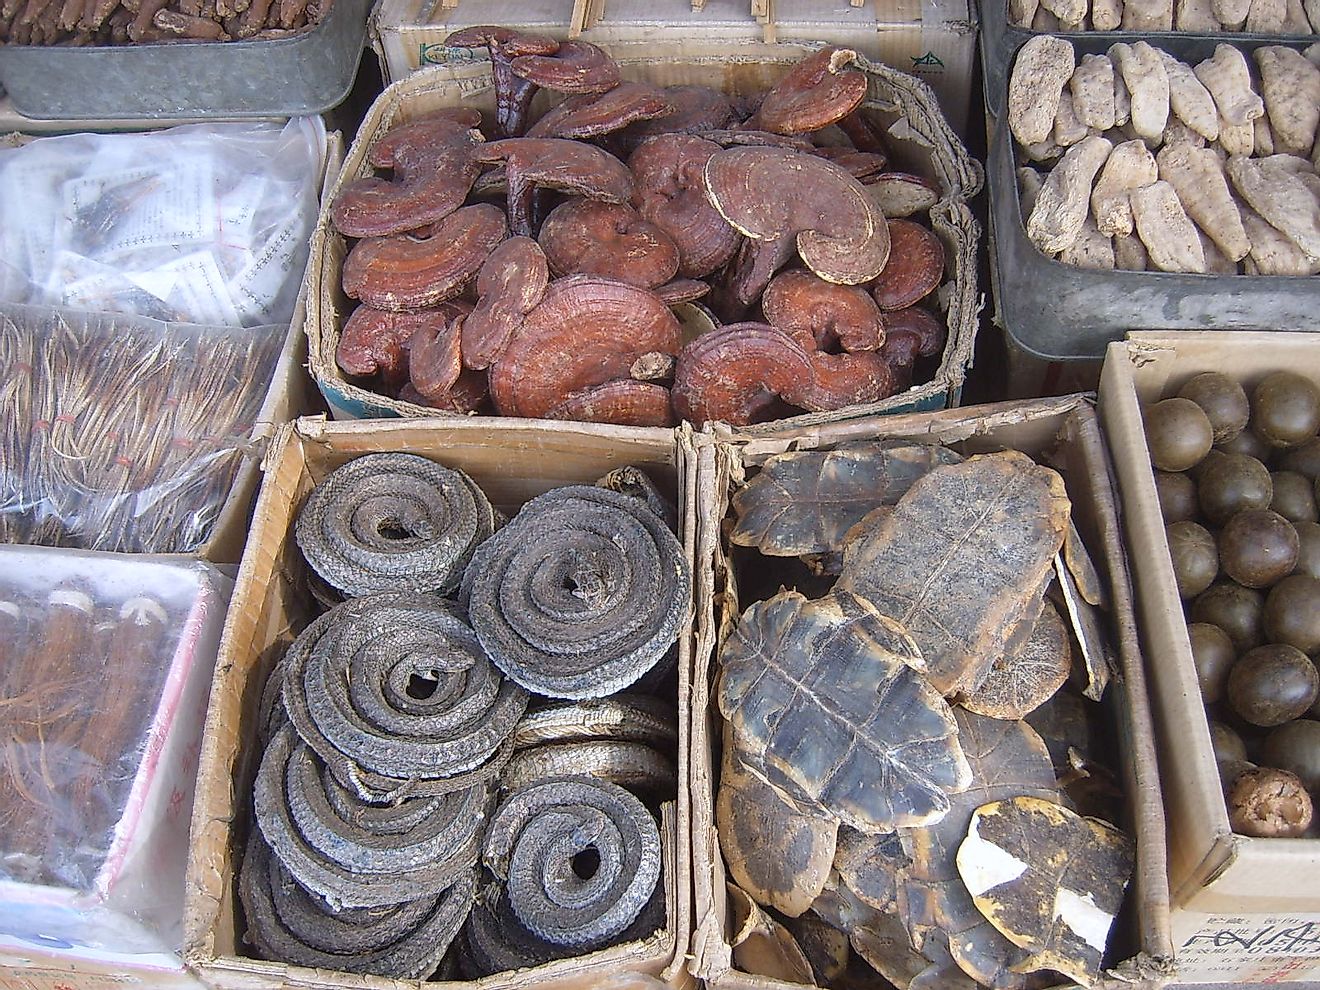 Assorted dried plant and animal parts used in traditional Chinese medicines, clockwise from top left corner: dried Lingzhi (lit. "spirit mushrooms"), ginseng, Luo Han Guo, turtle shell underbelly (plastron), and dried curled snakes. Image credit: User:Vbe